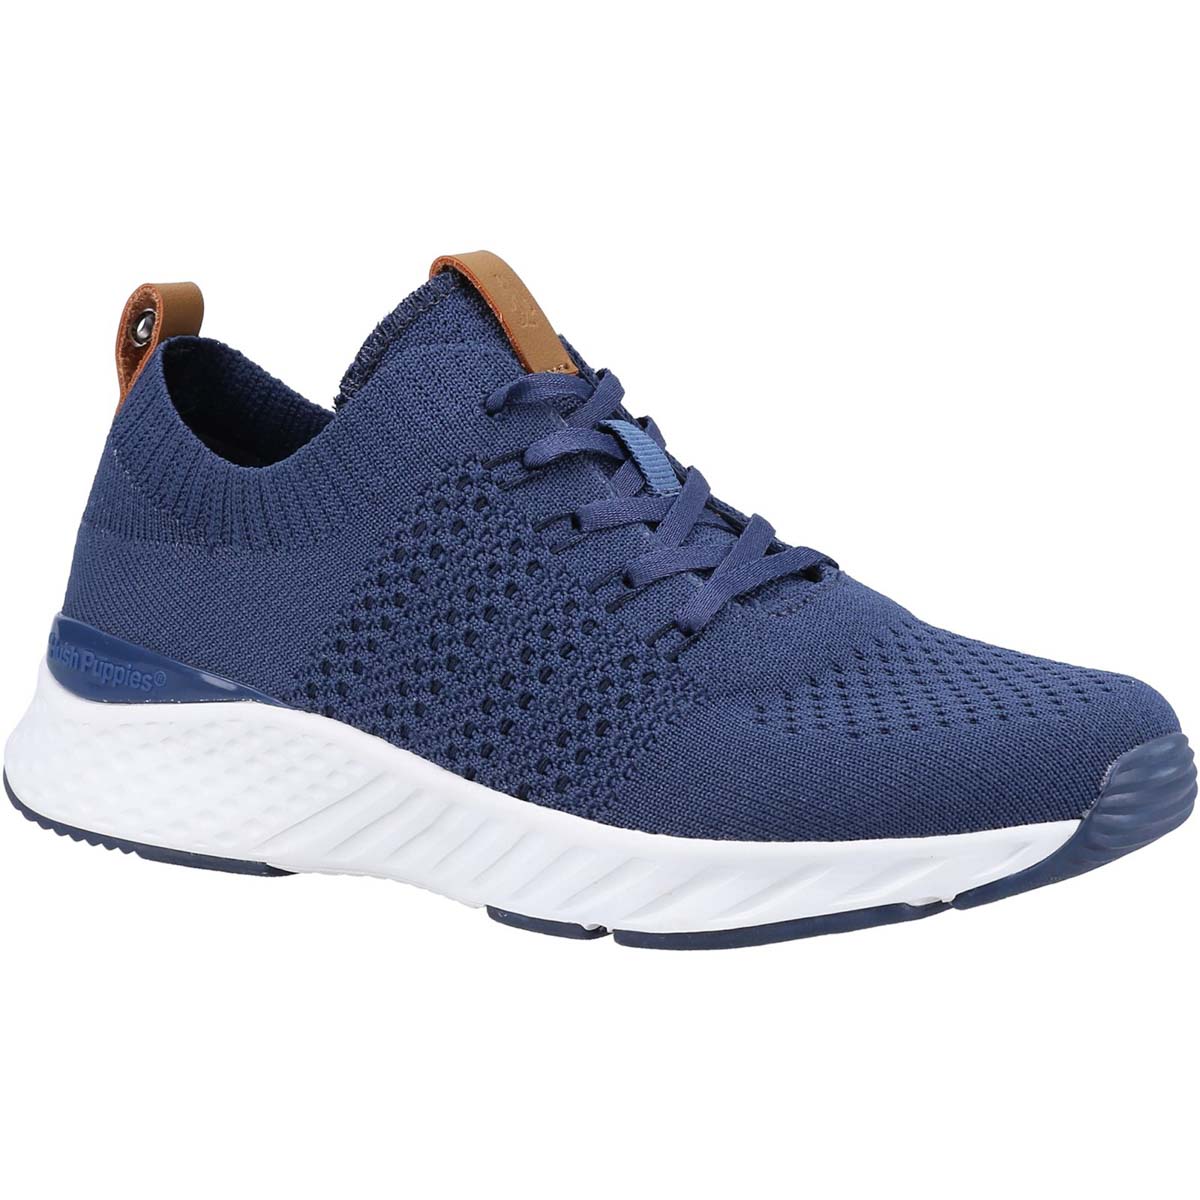 Hush Puppies Opal Navy Womens trainers 36621-68312 in a Plain Textile in Size 4